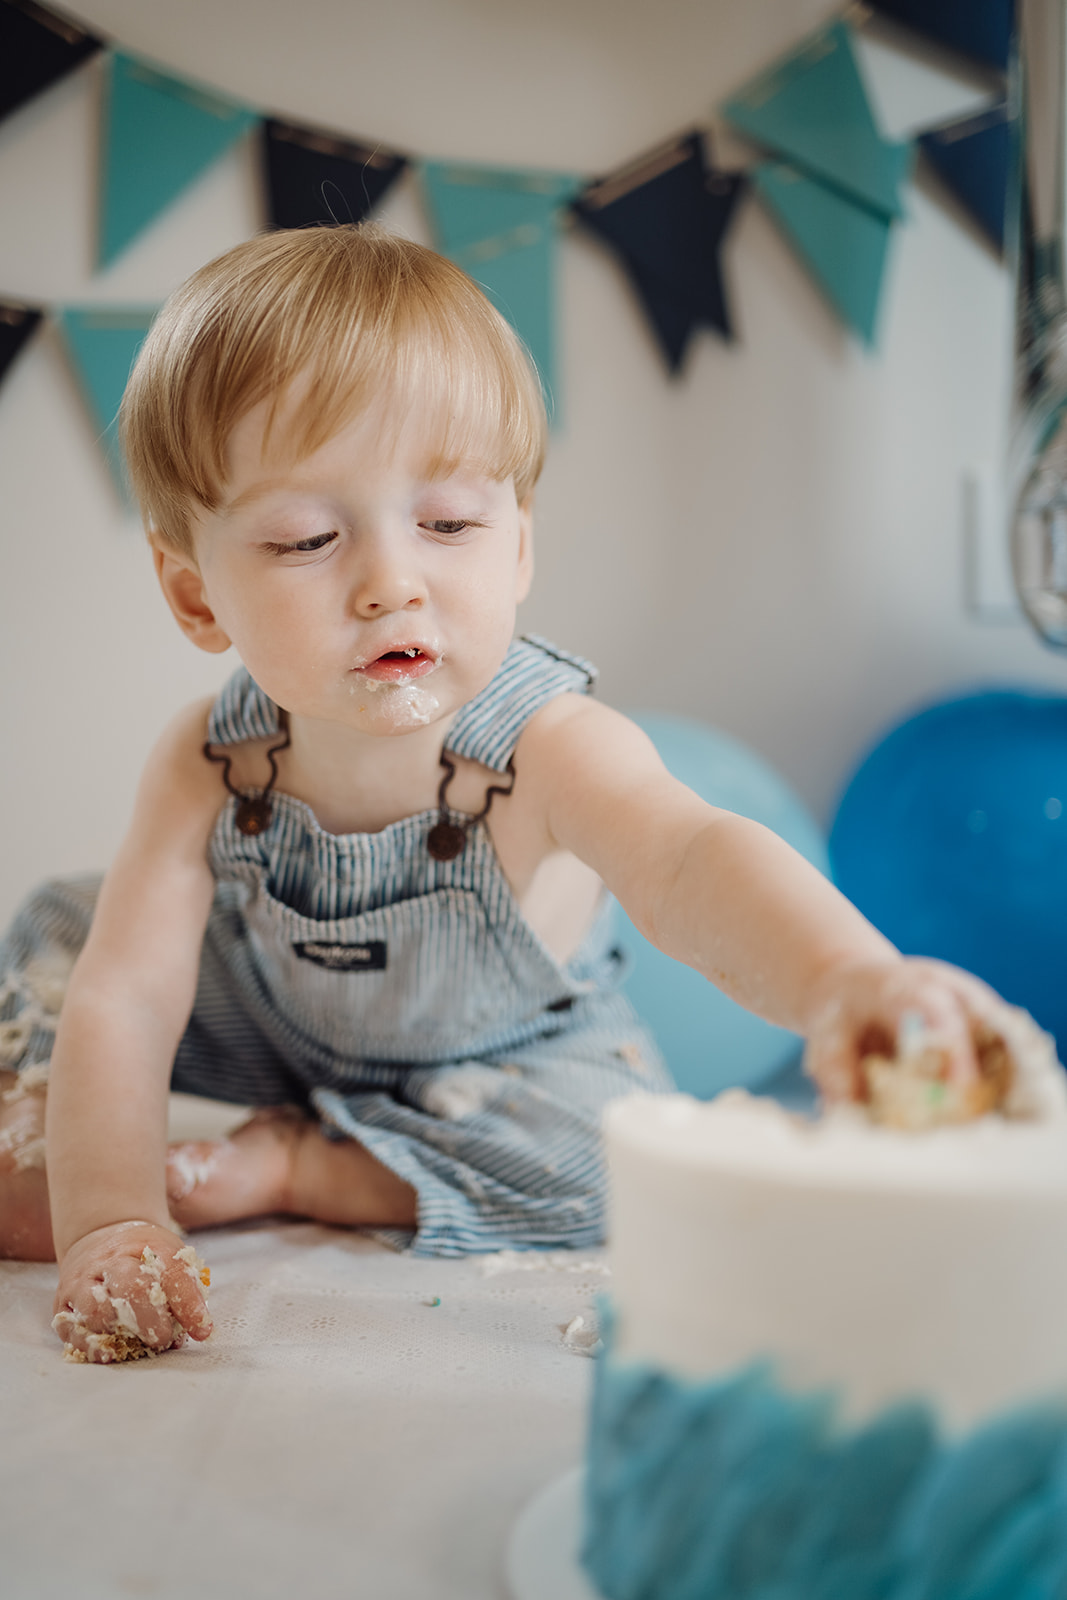 A little boy reaching for cake.